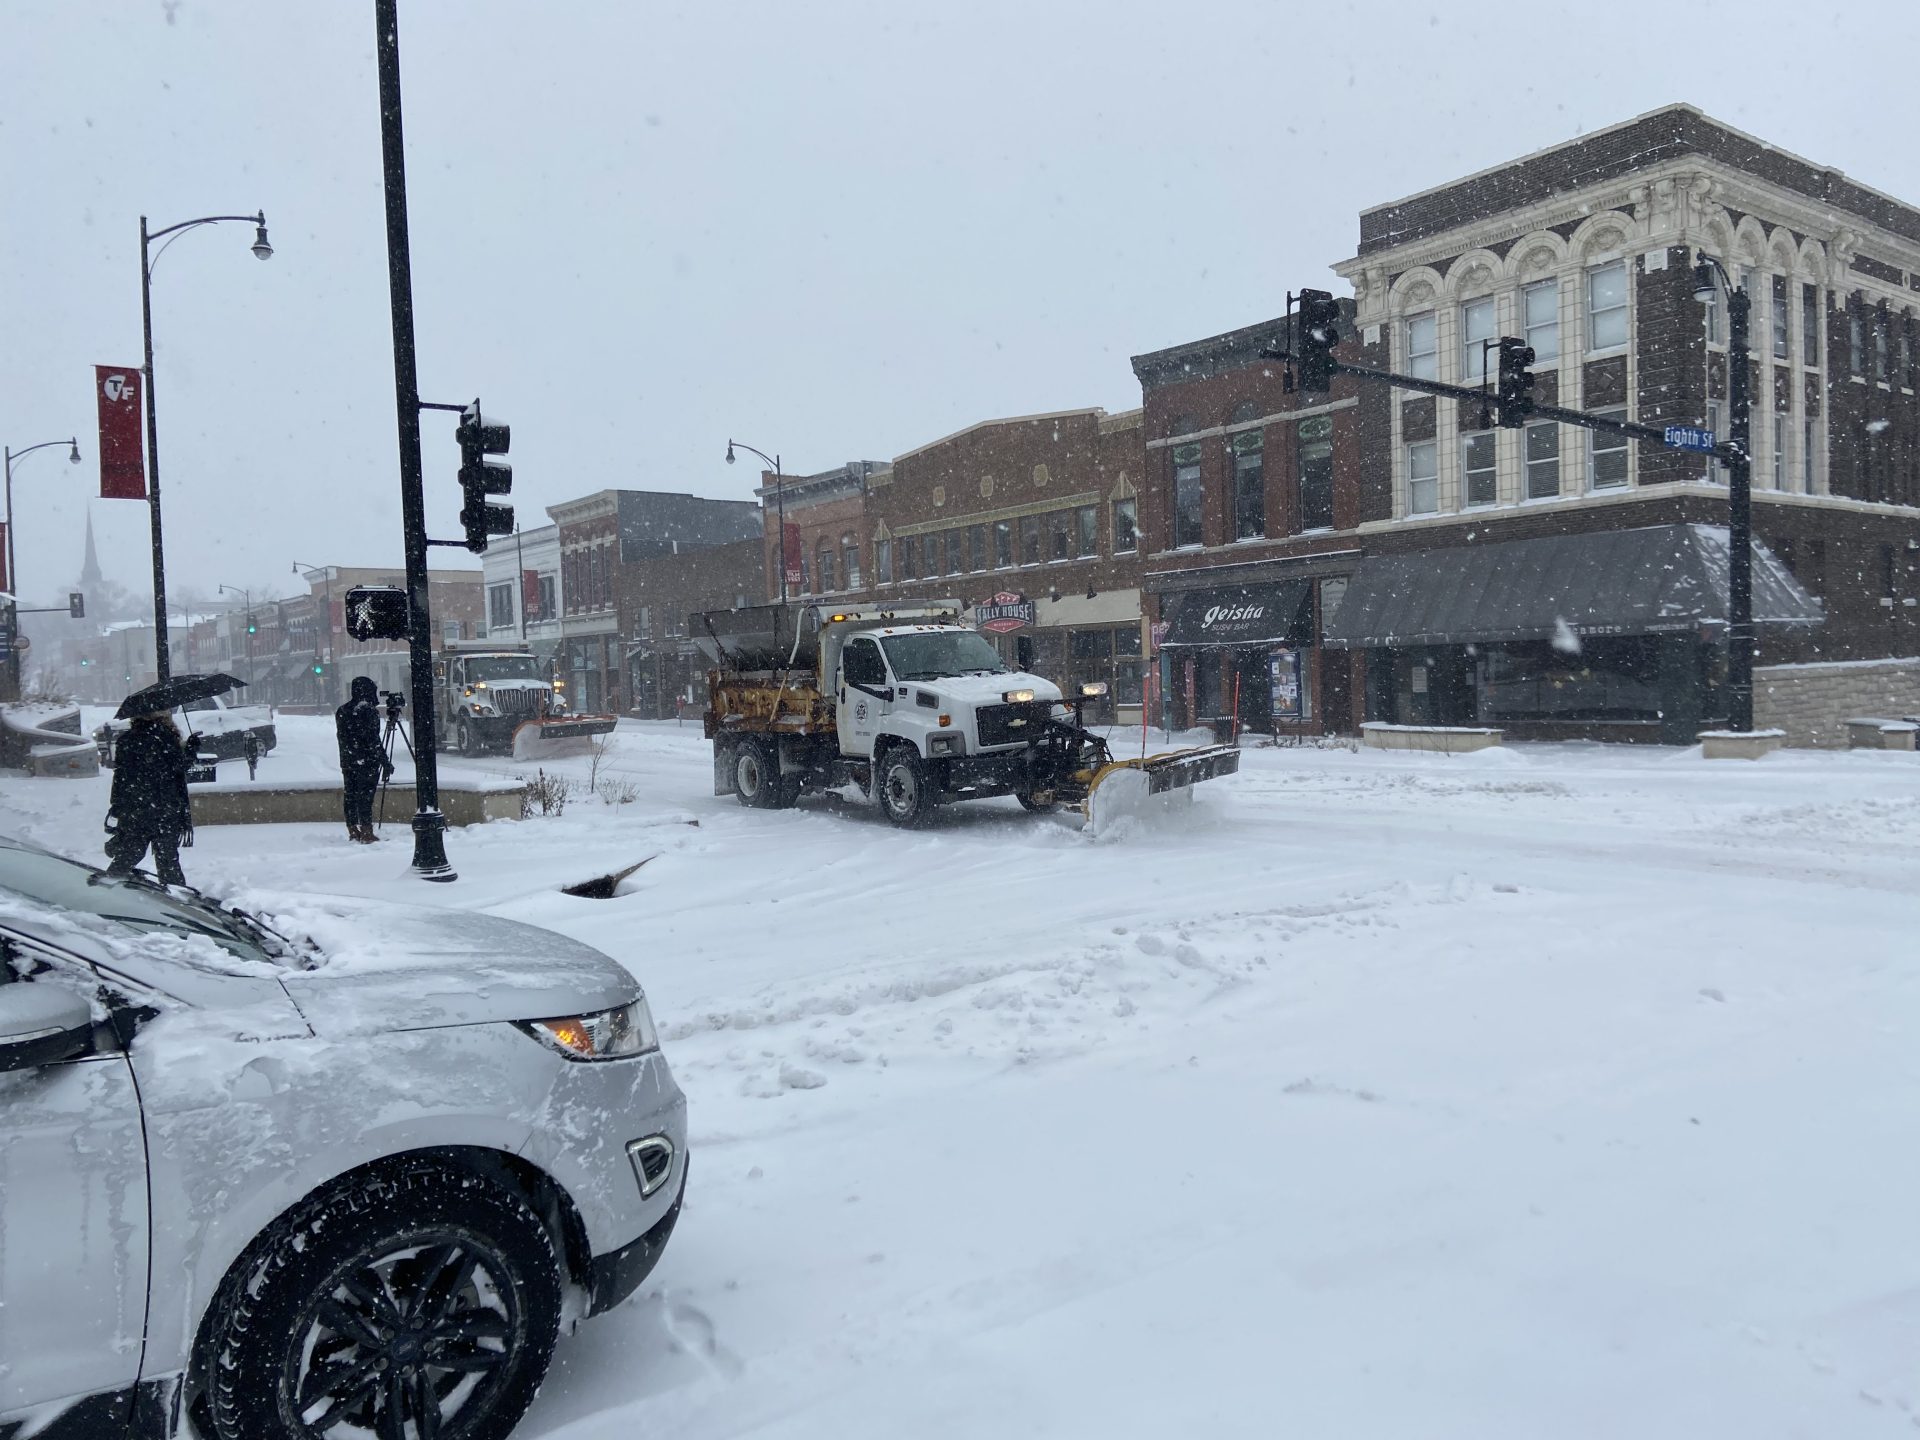 UPDATE: Columbia receives 9.9 inches of snow during storm, NWS says